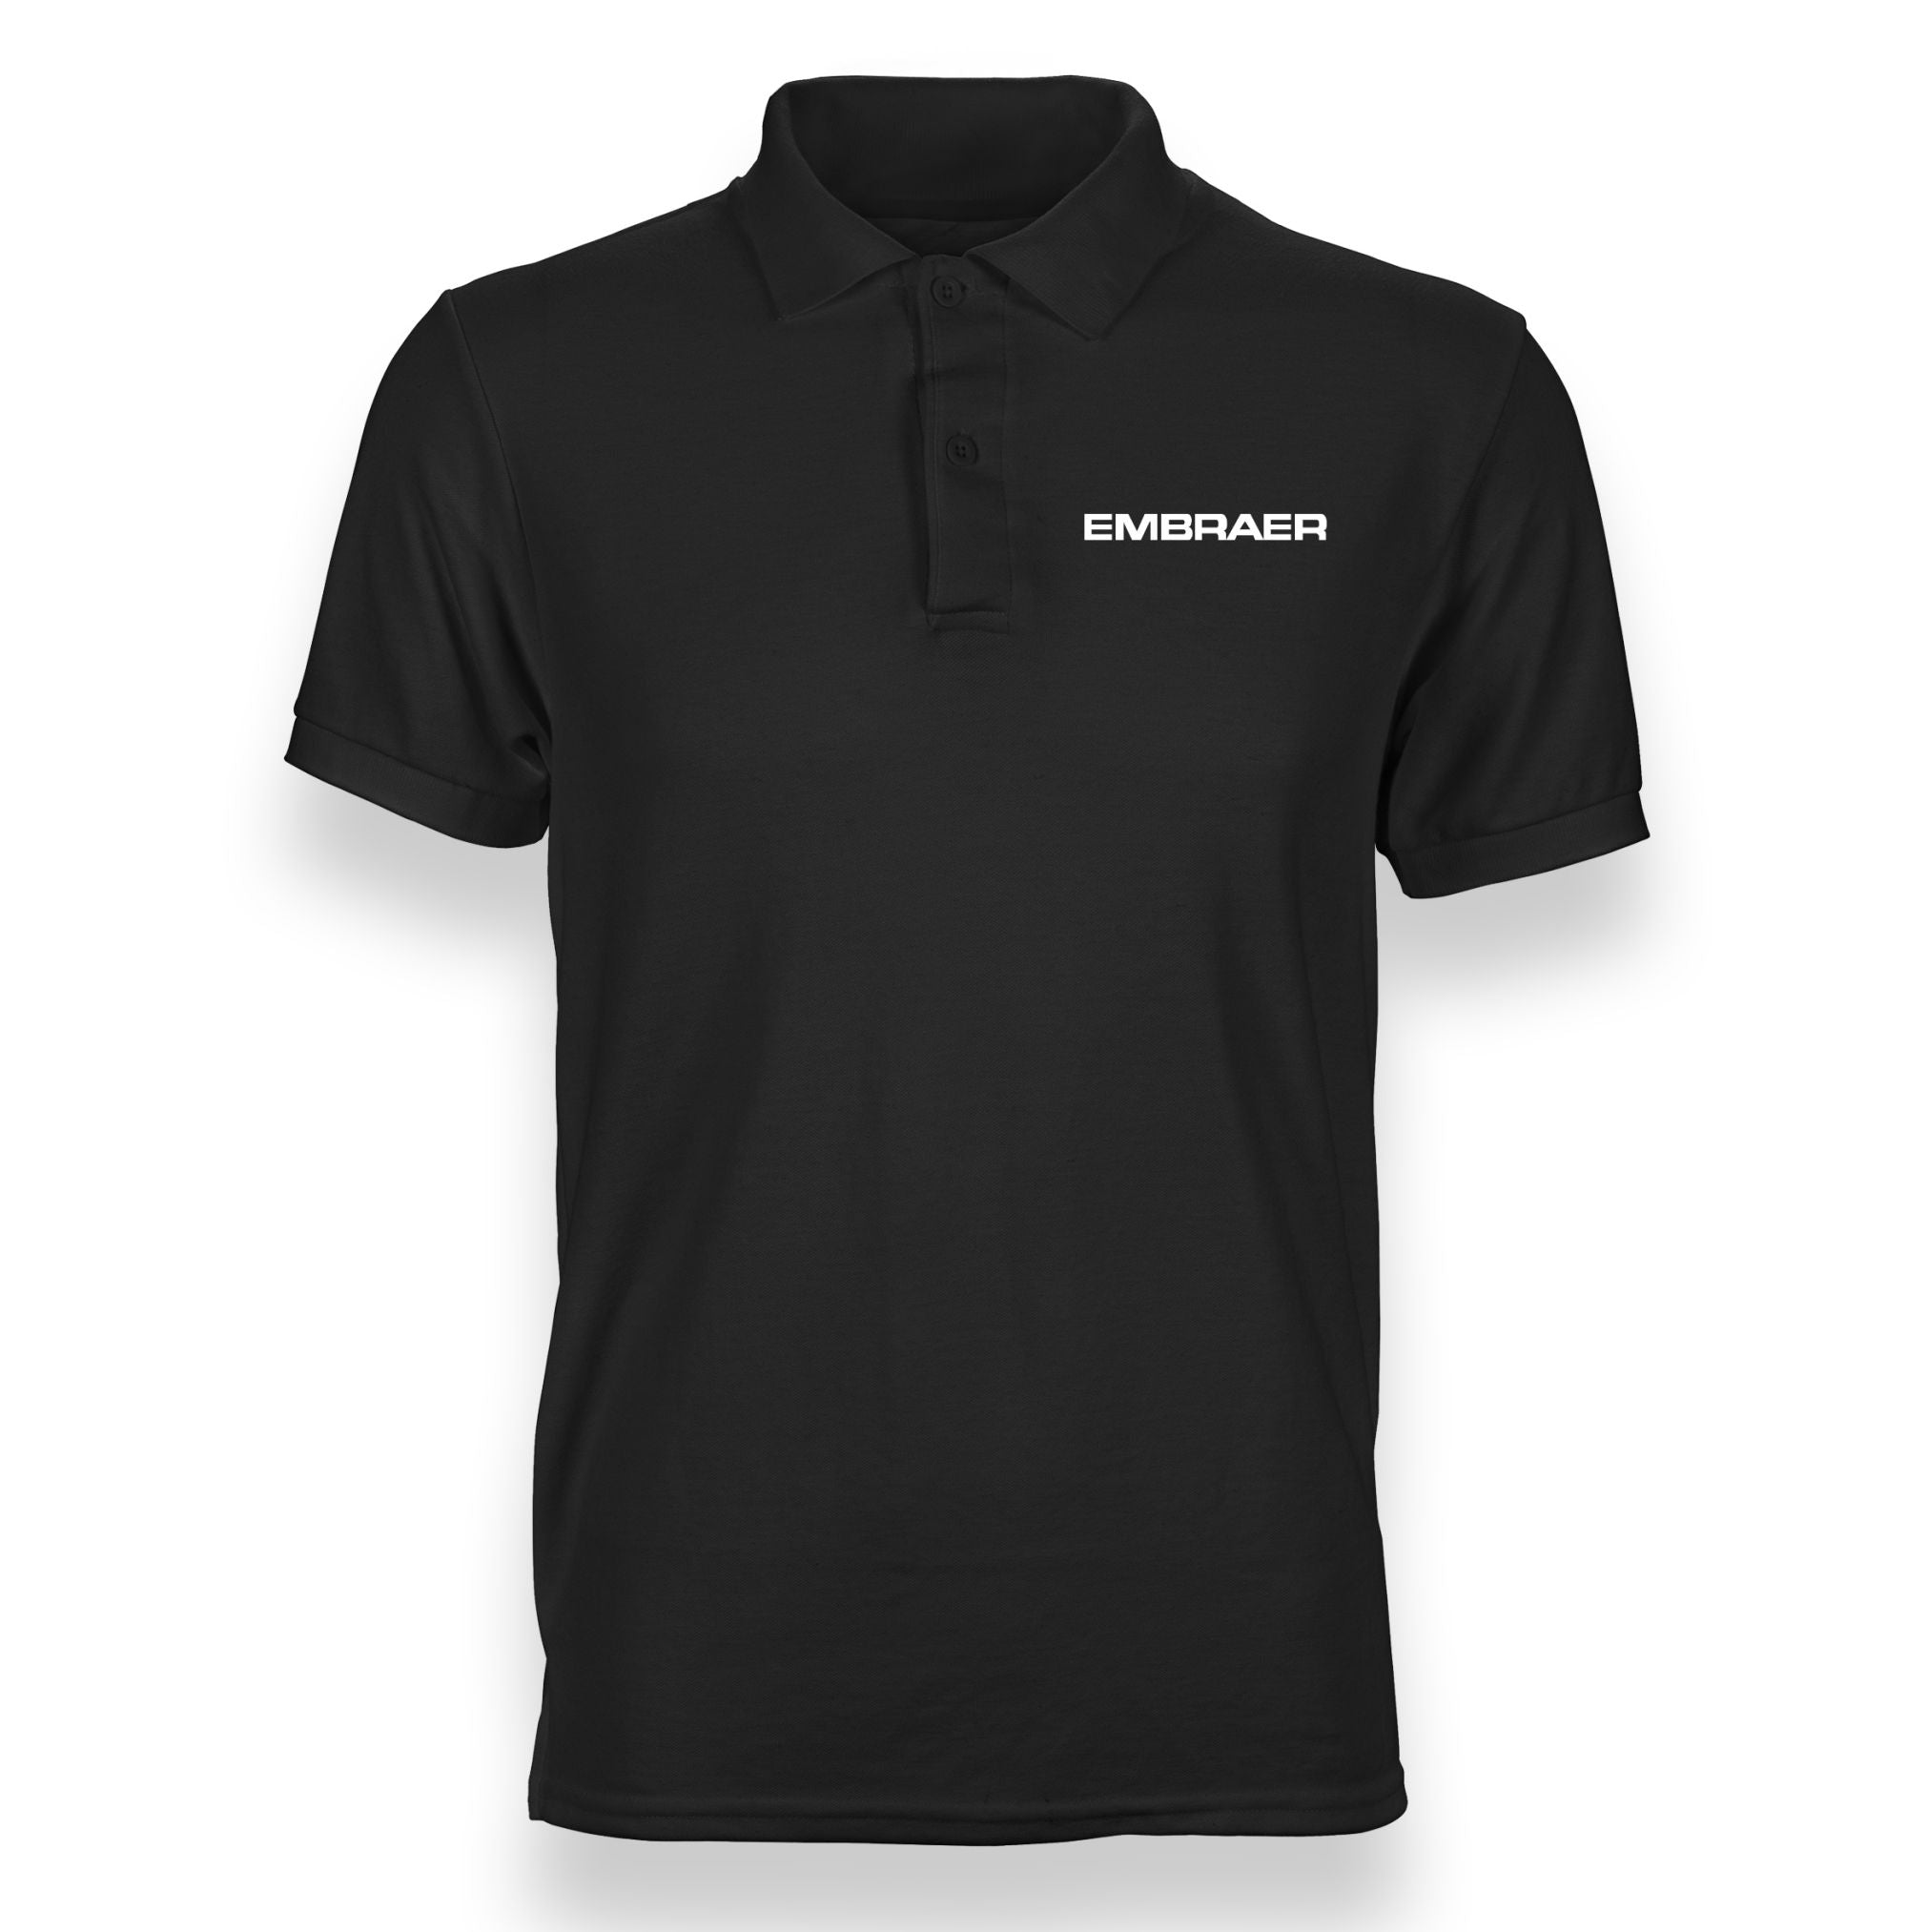 Embraer & Text Designed "WOMEN" Polo T-Shirts